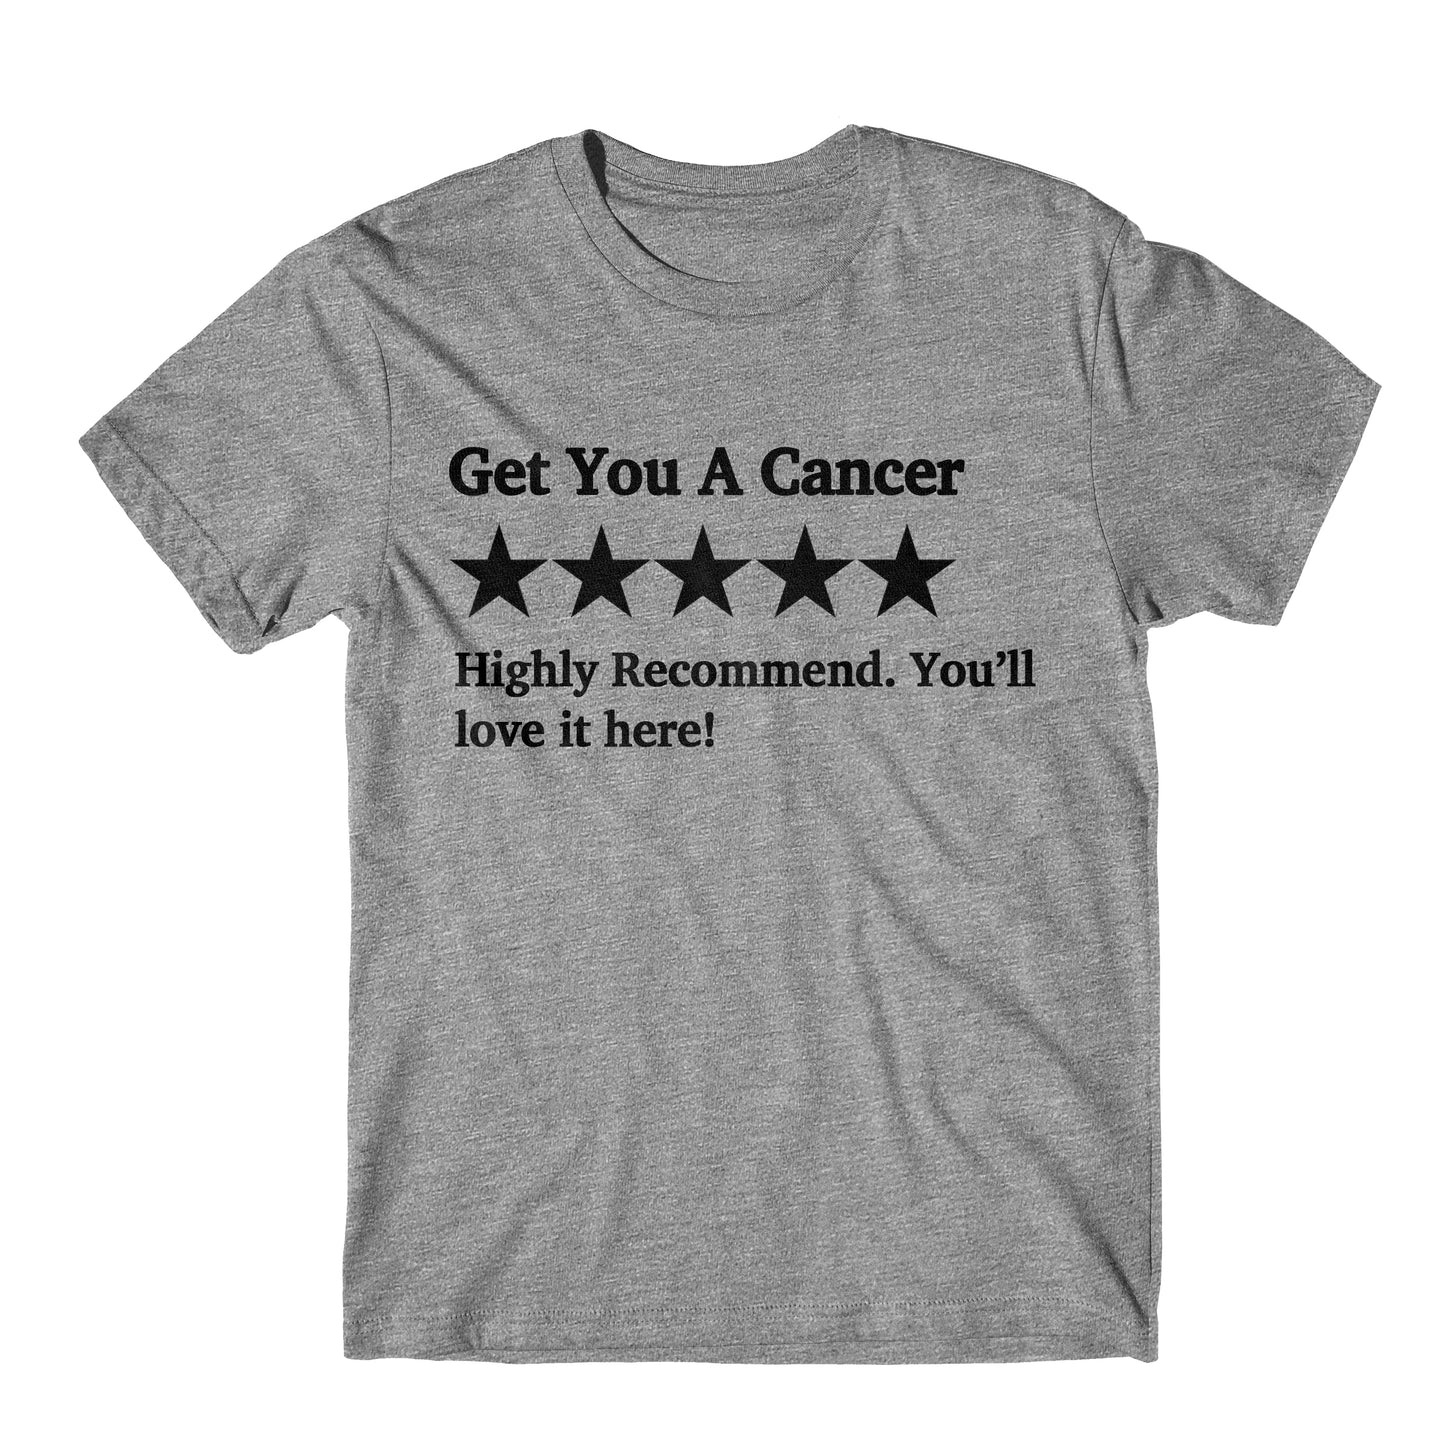 "Get You A Cancer Five Star Rating" Tee